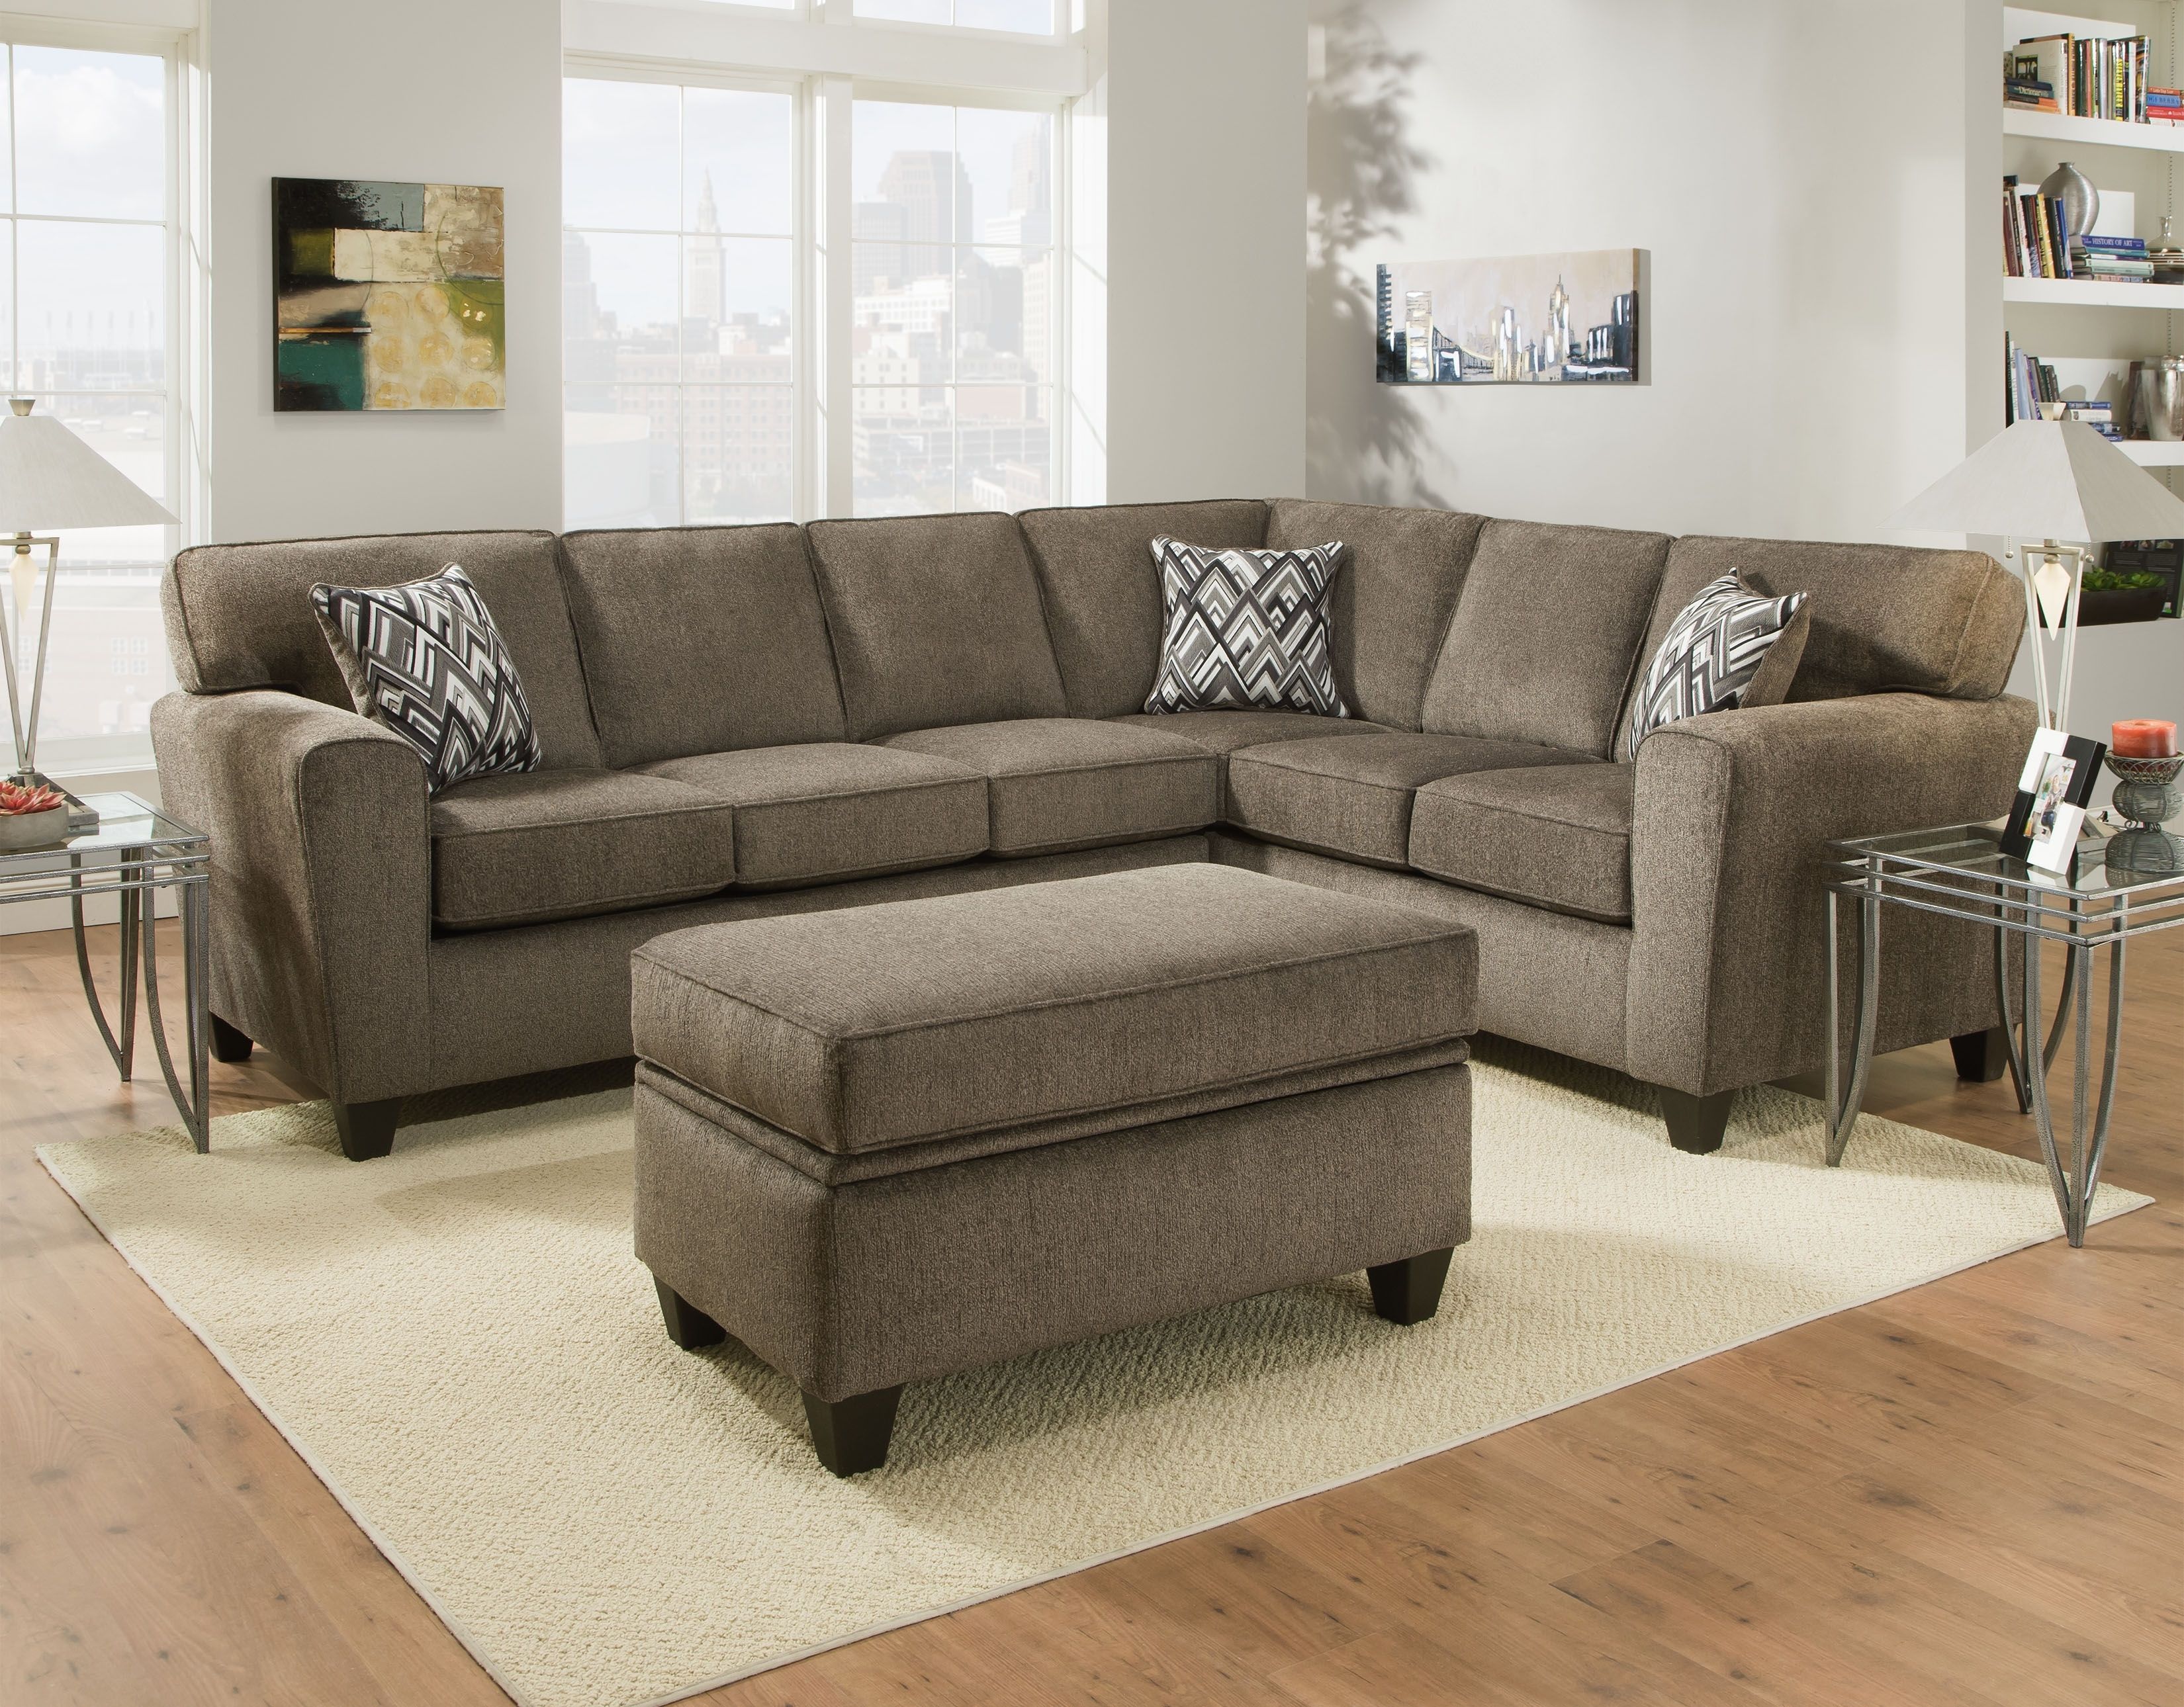 Living Room – Crazy Joe's Best Deal Furniture For Janesville Wi Sectional Sofas (View 2 of 10)